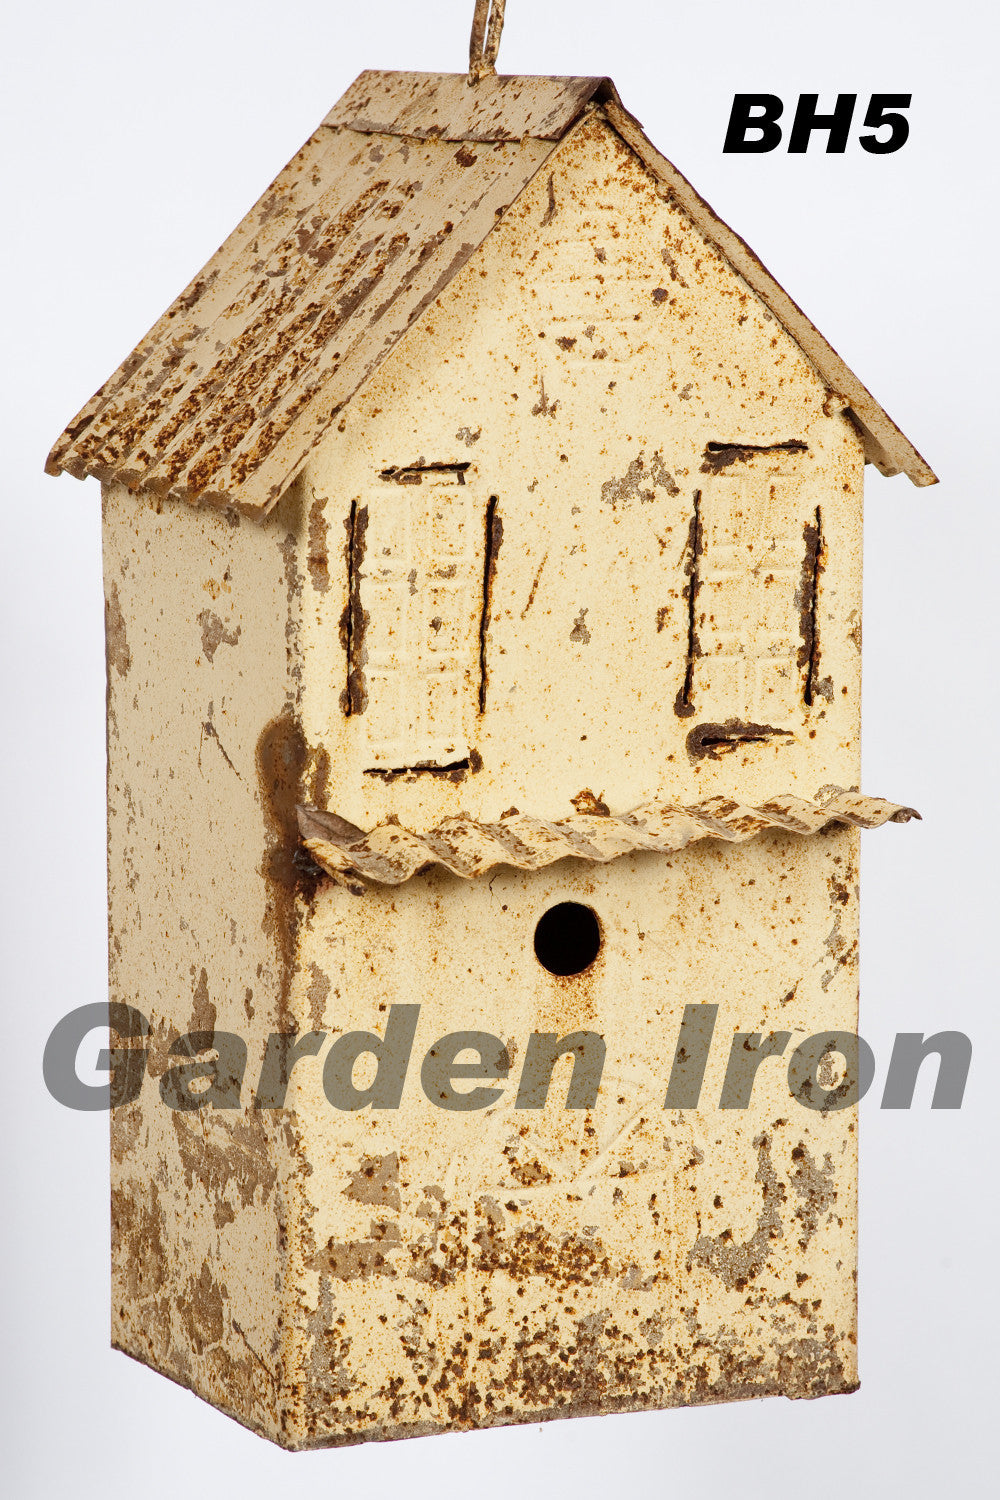 Double Bird House With Clean Out
Min Qty: 2